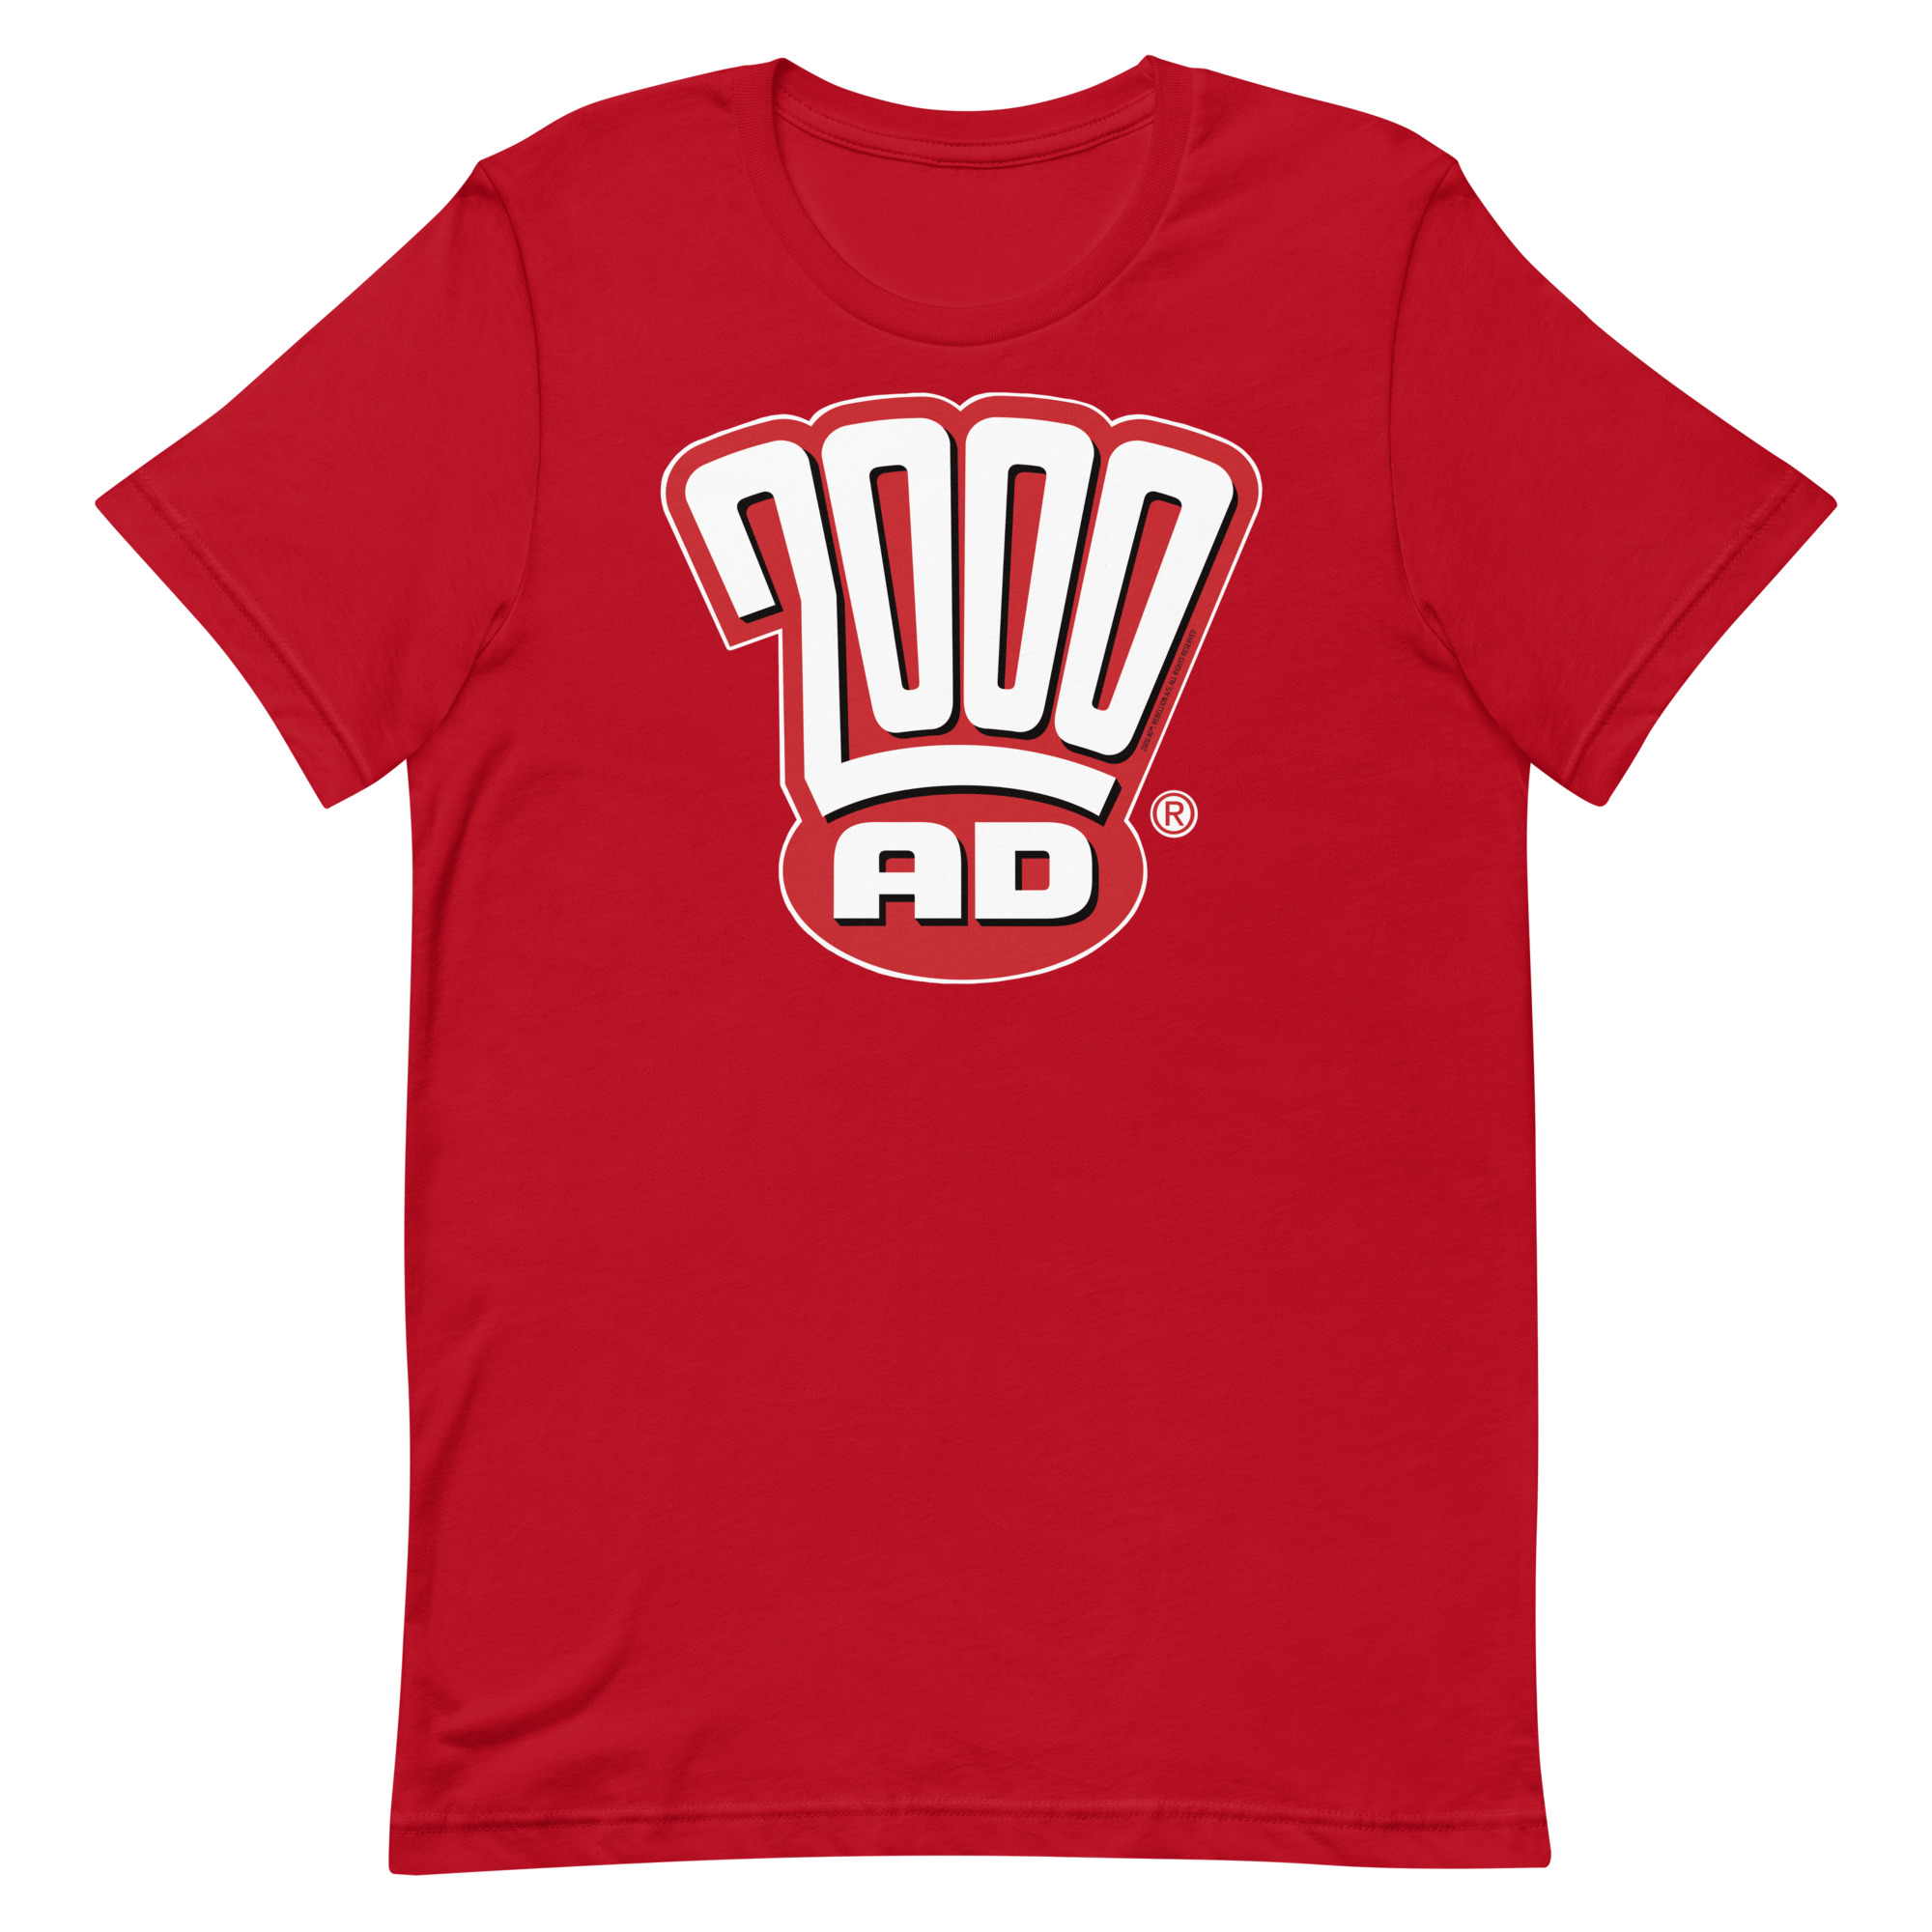 Image of a Red coloured 2000AD - The Modern Era t-shirt featuring a large 2000AD - The Modern Era logo in the middle